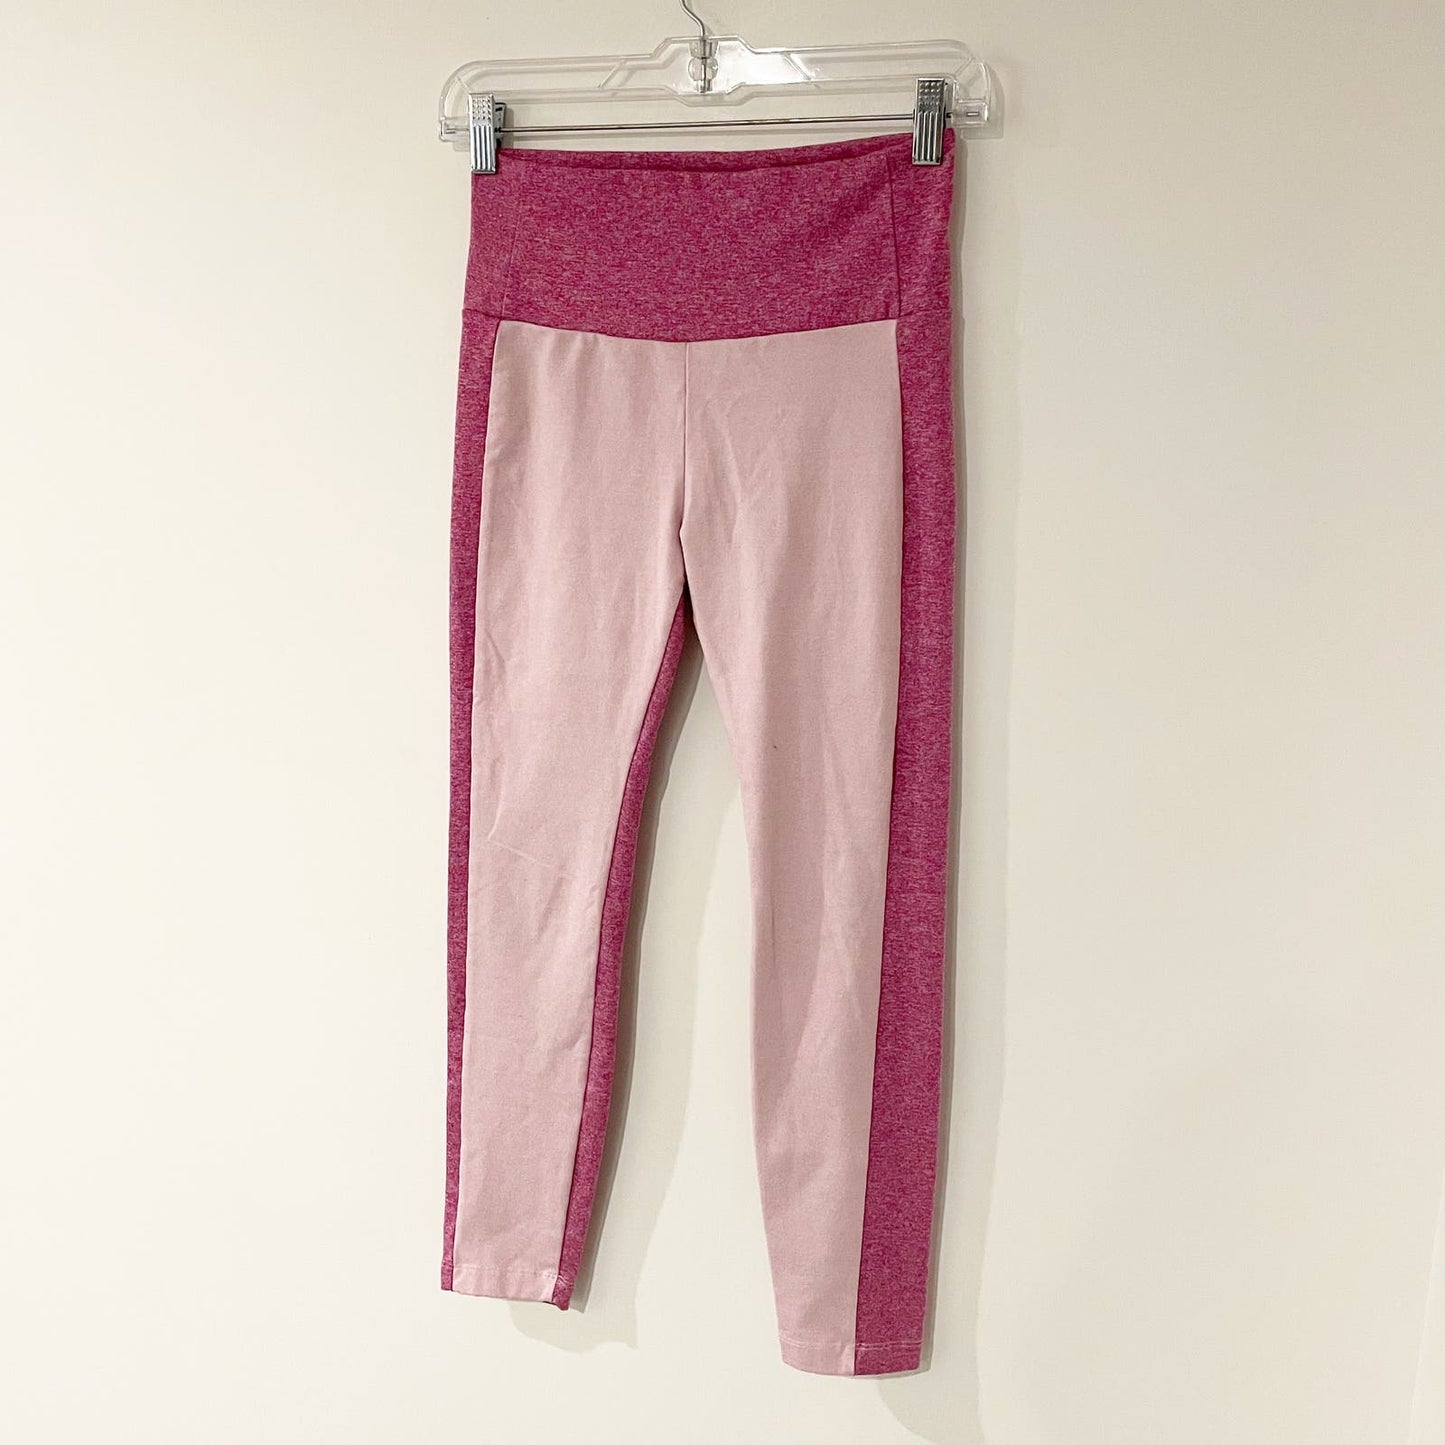 Anthropologie Daily Practice Colorblock High Rise Leggings Pink Small